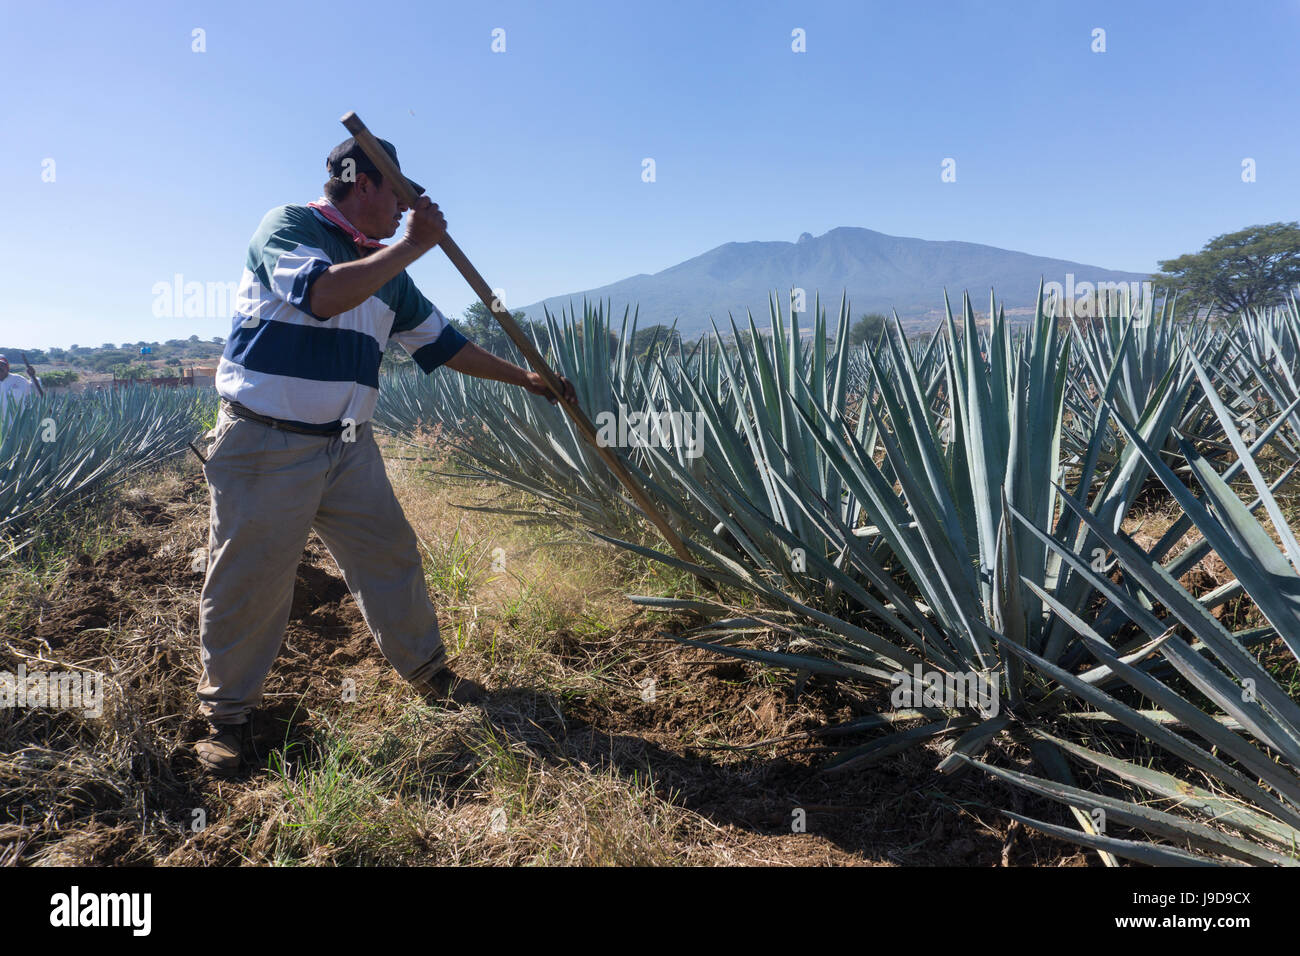 Tequila is made from the blue agave plant in the state of Jalisco and mostly around the city of Tequila, Jalisco, Mexico Stock Photo